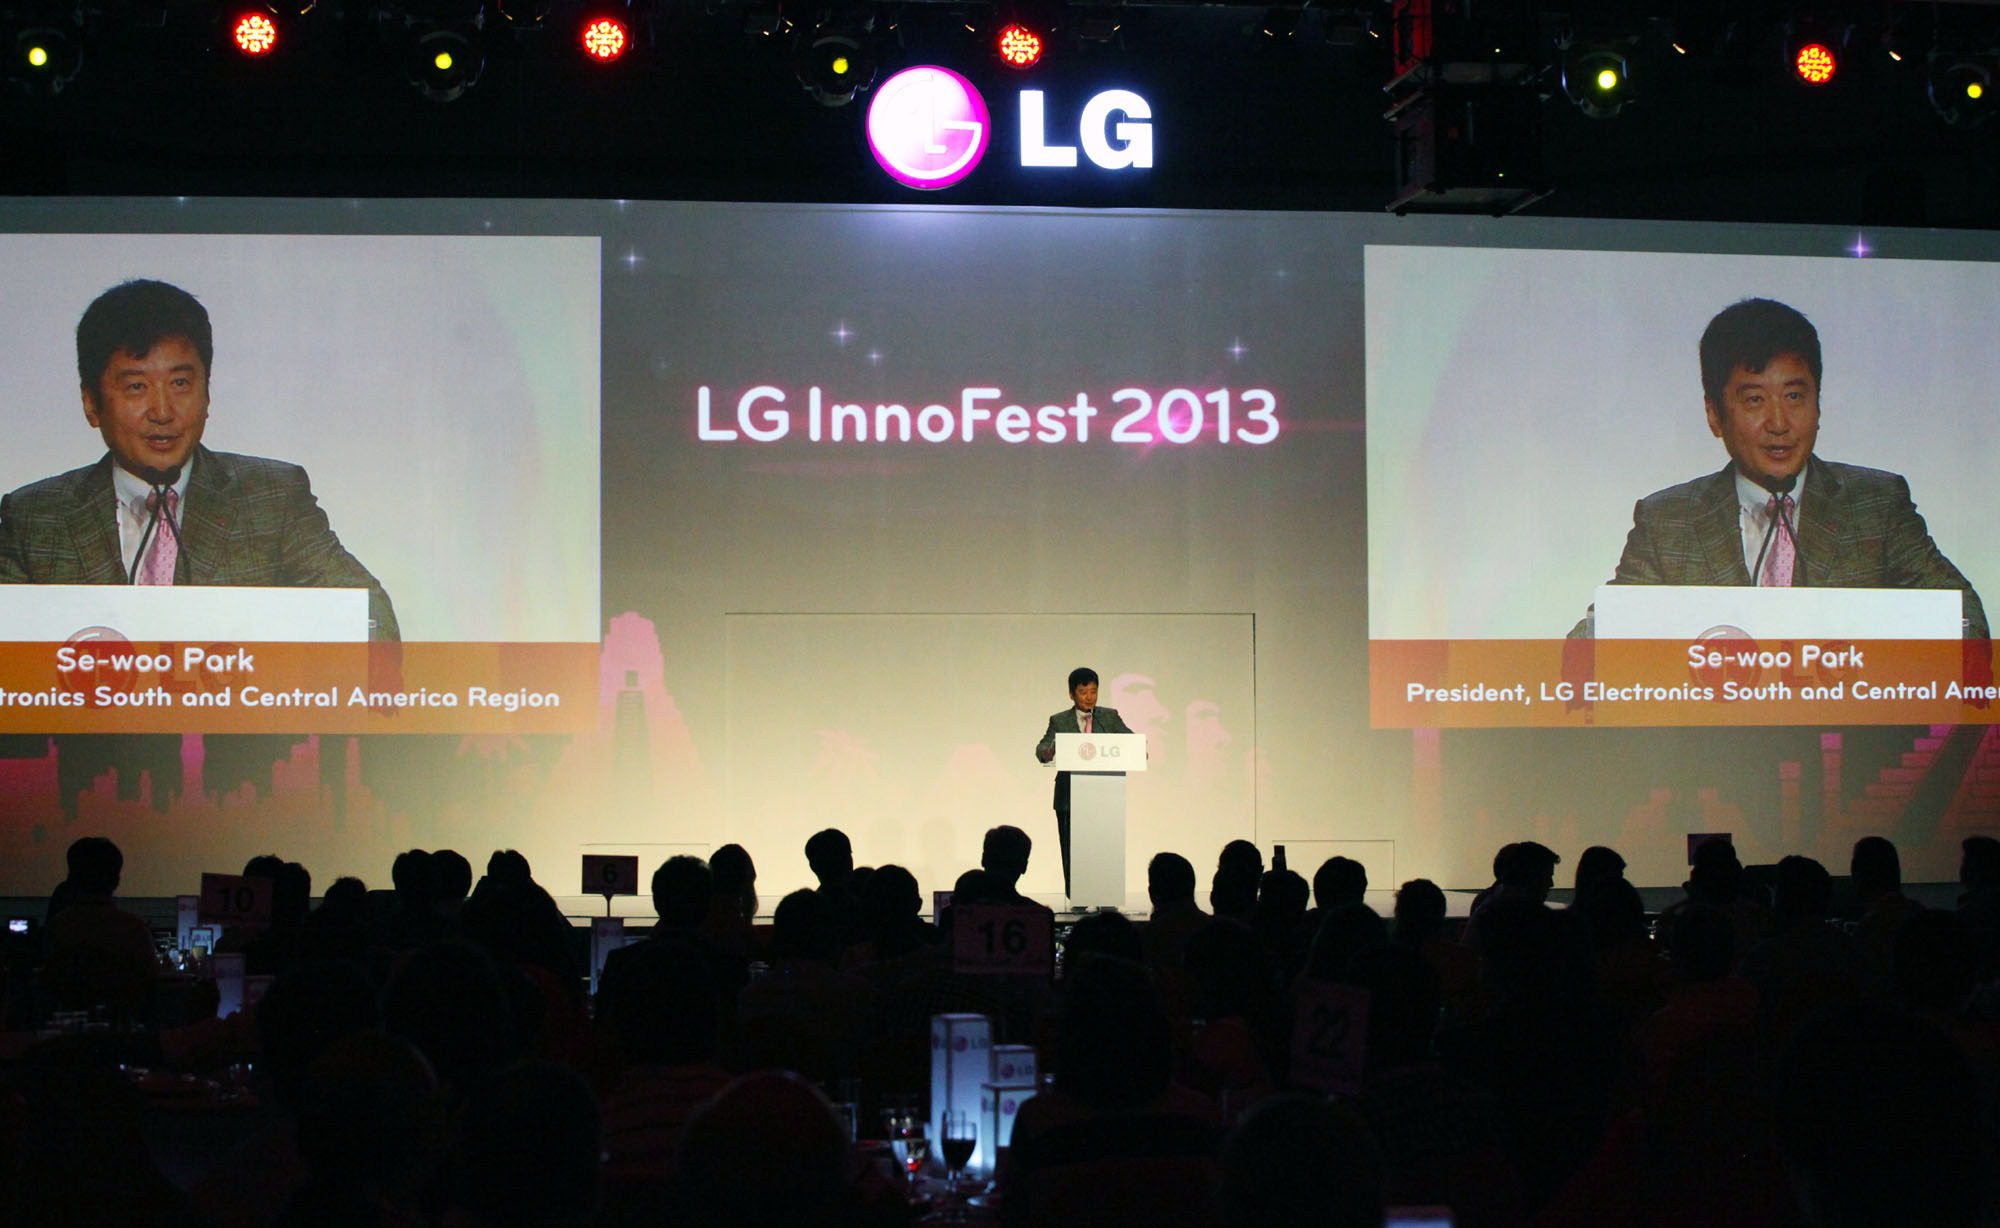 Park Se-woo, president of the South and Central America Region at LG Electronics presents LG's vision of being the number one home appliance brand by 2015 at LG InnoFest 2013